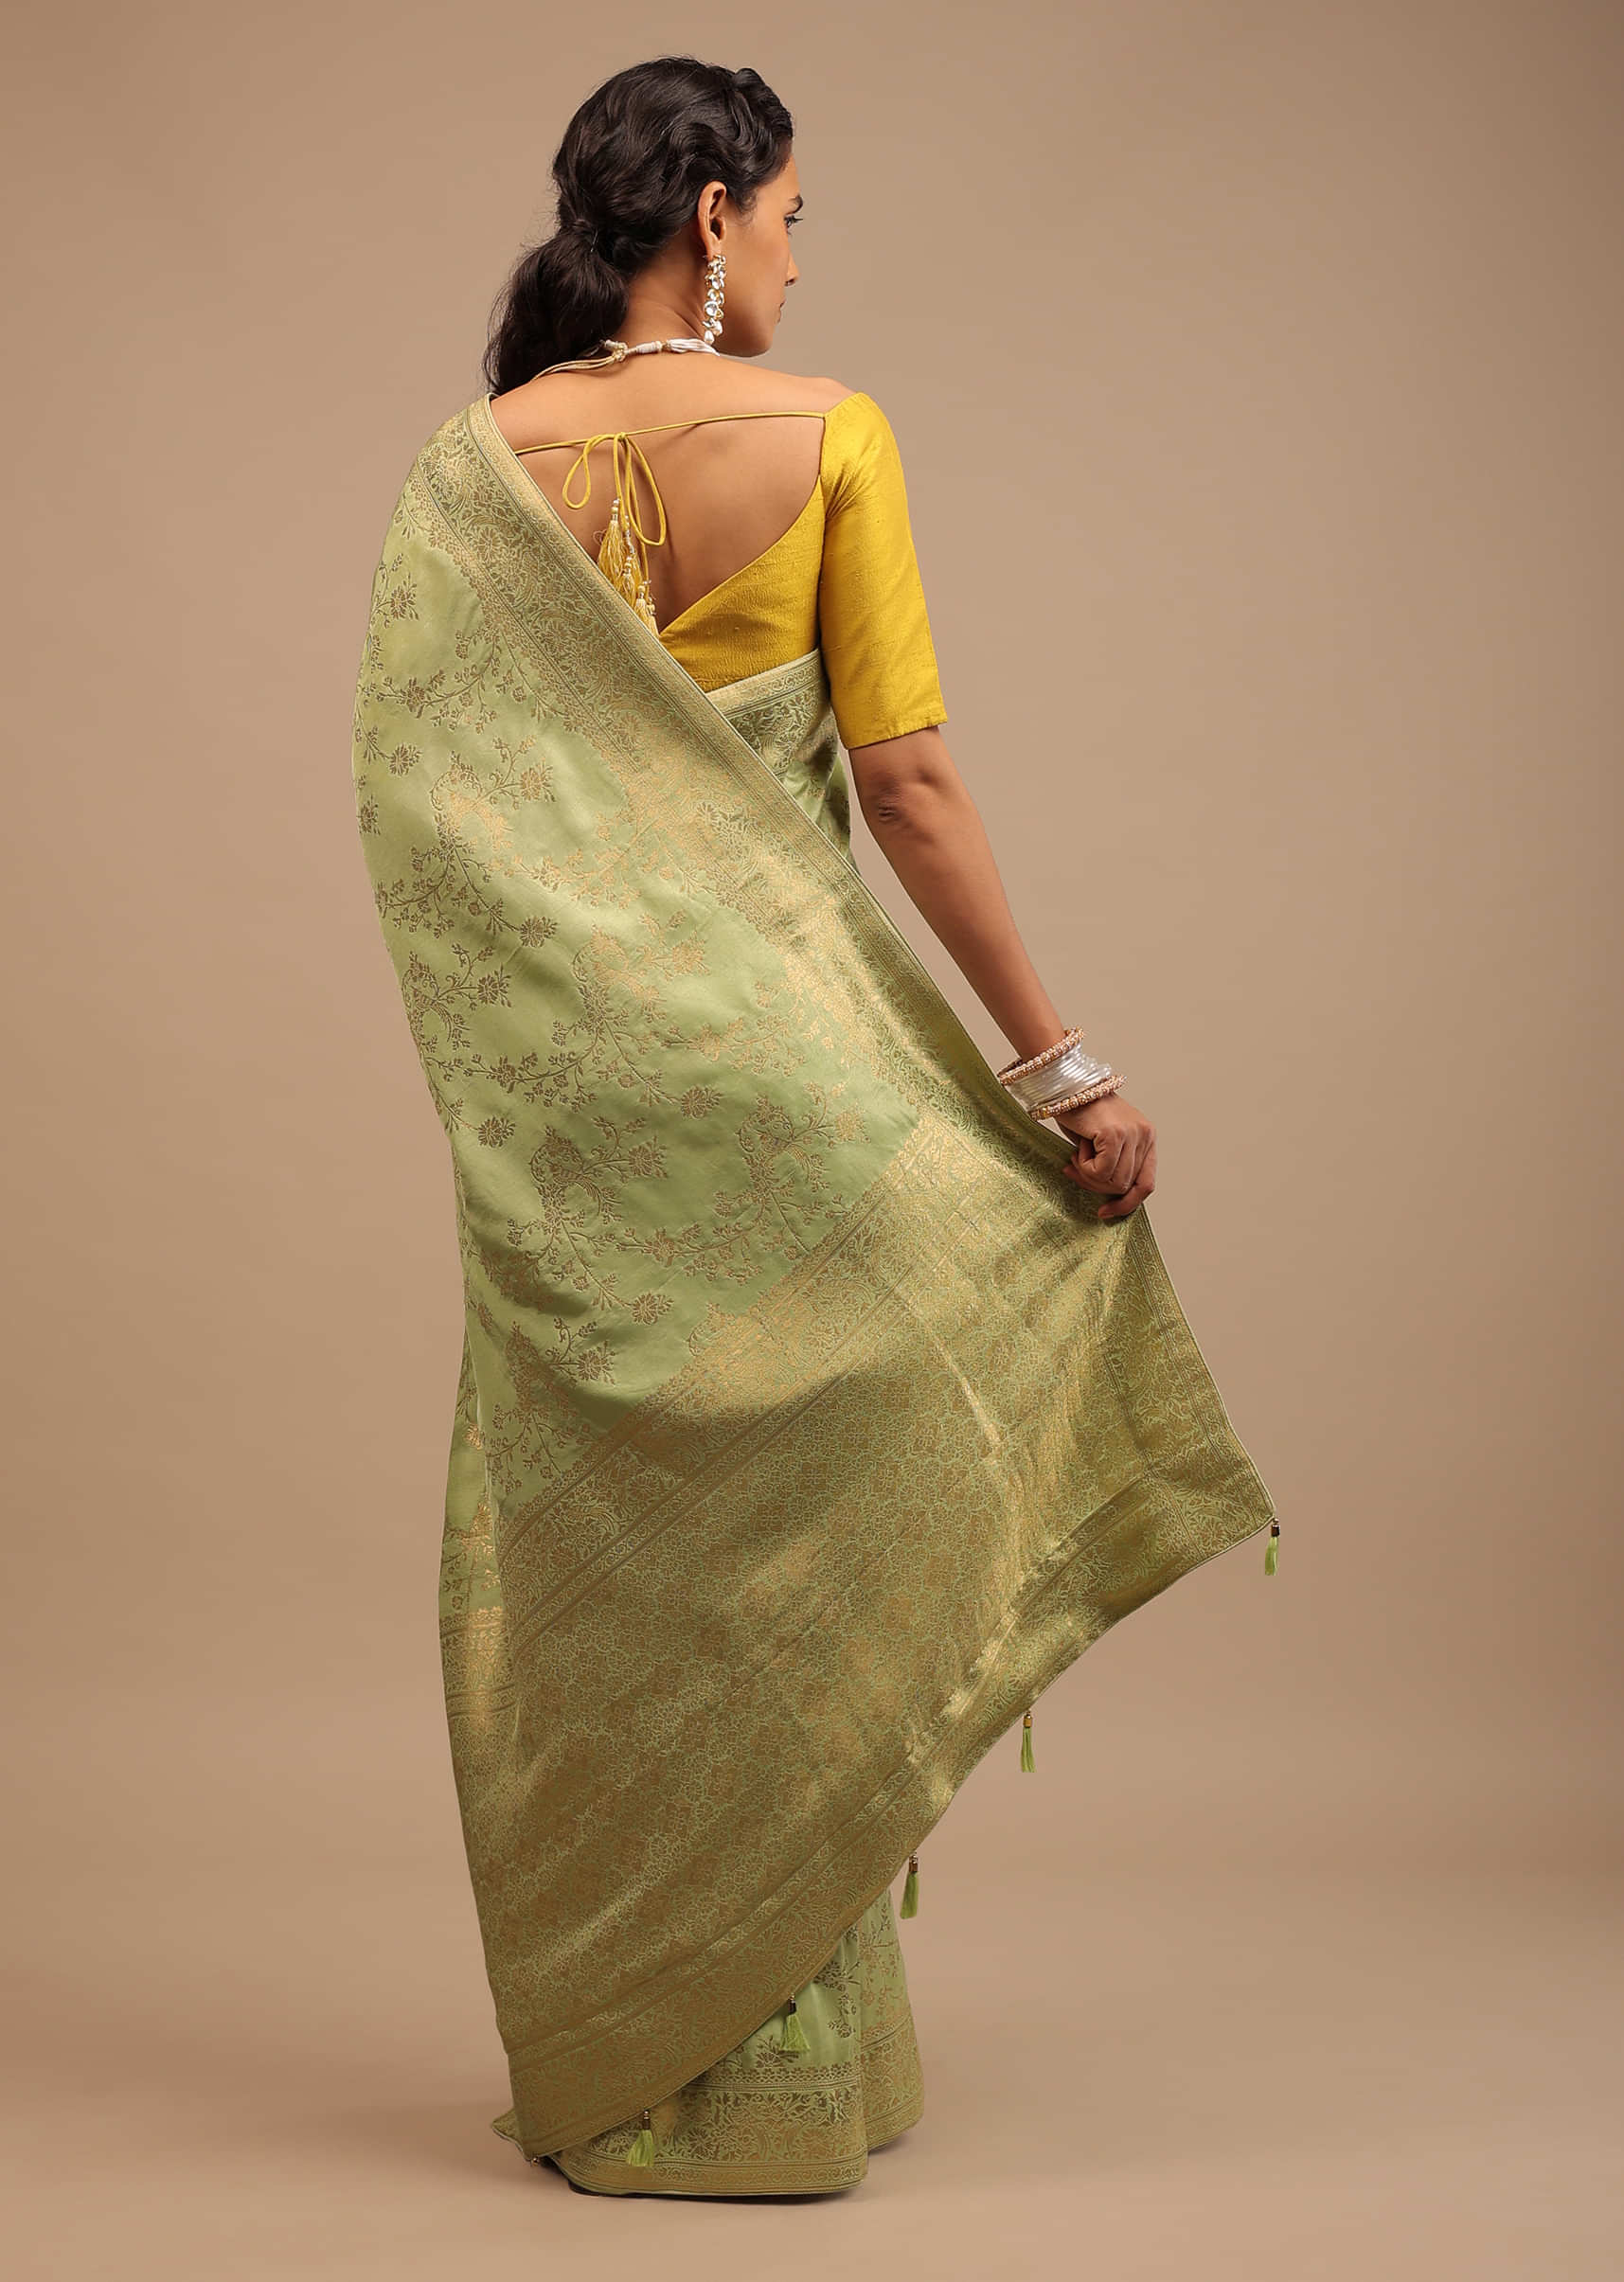 Pista Green Saree In Dola Silk With Woven Floral Jaal And Moroccan Weave On Pallu